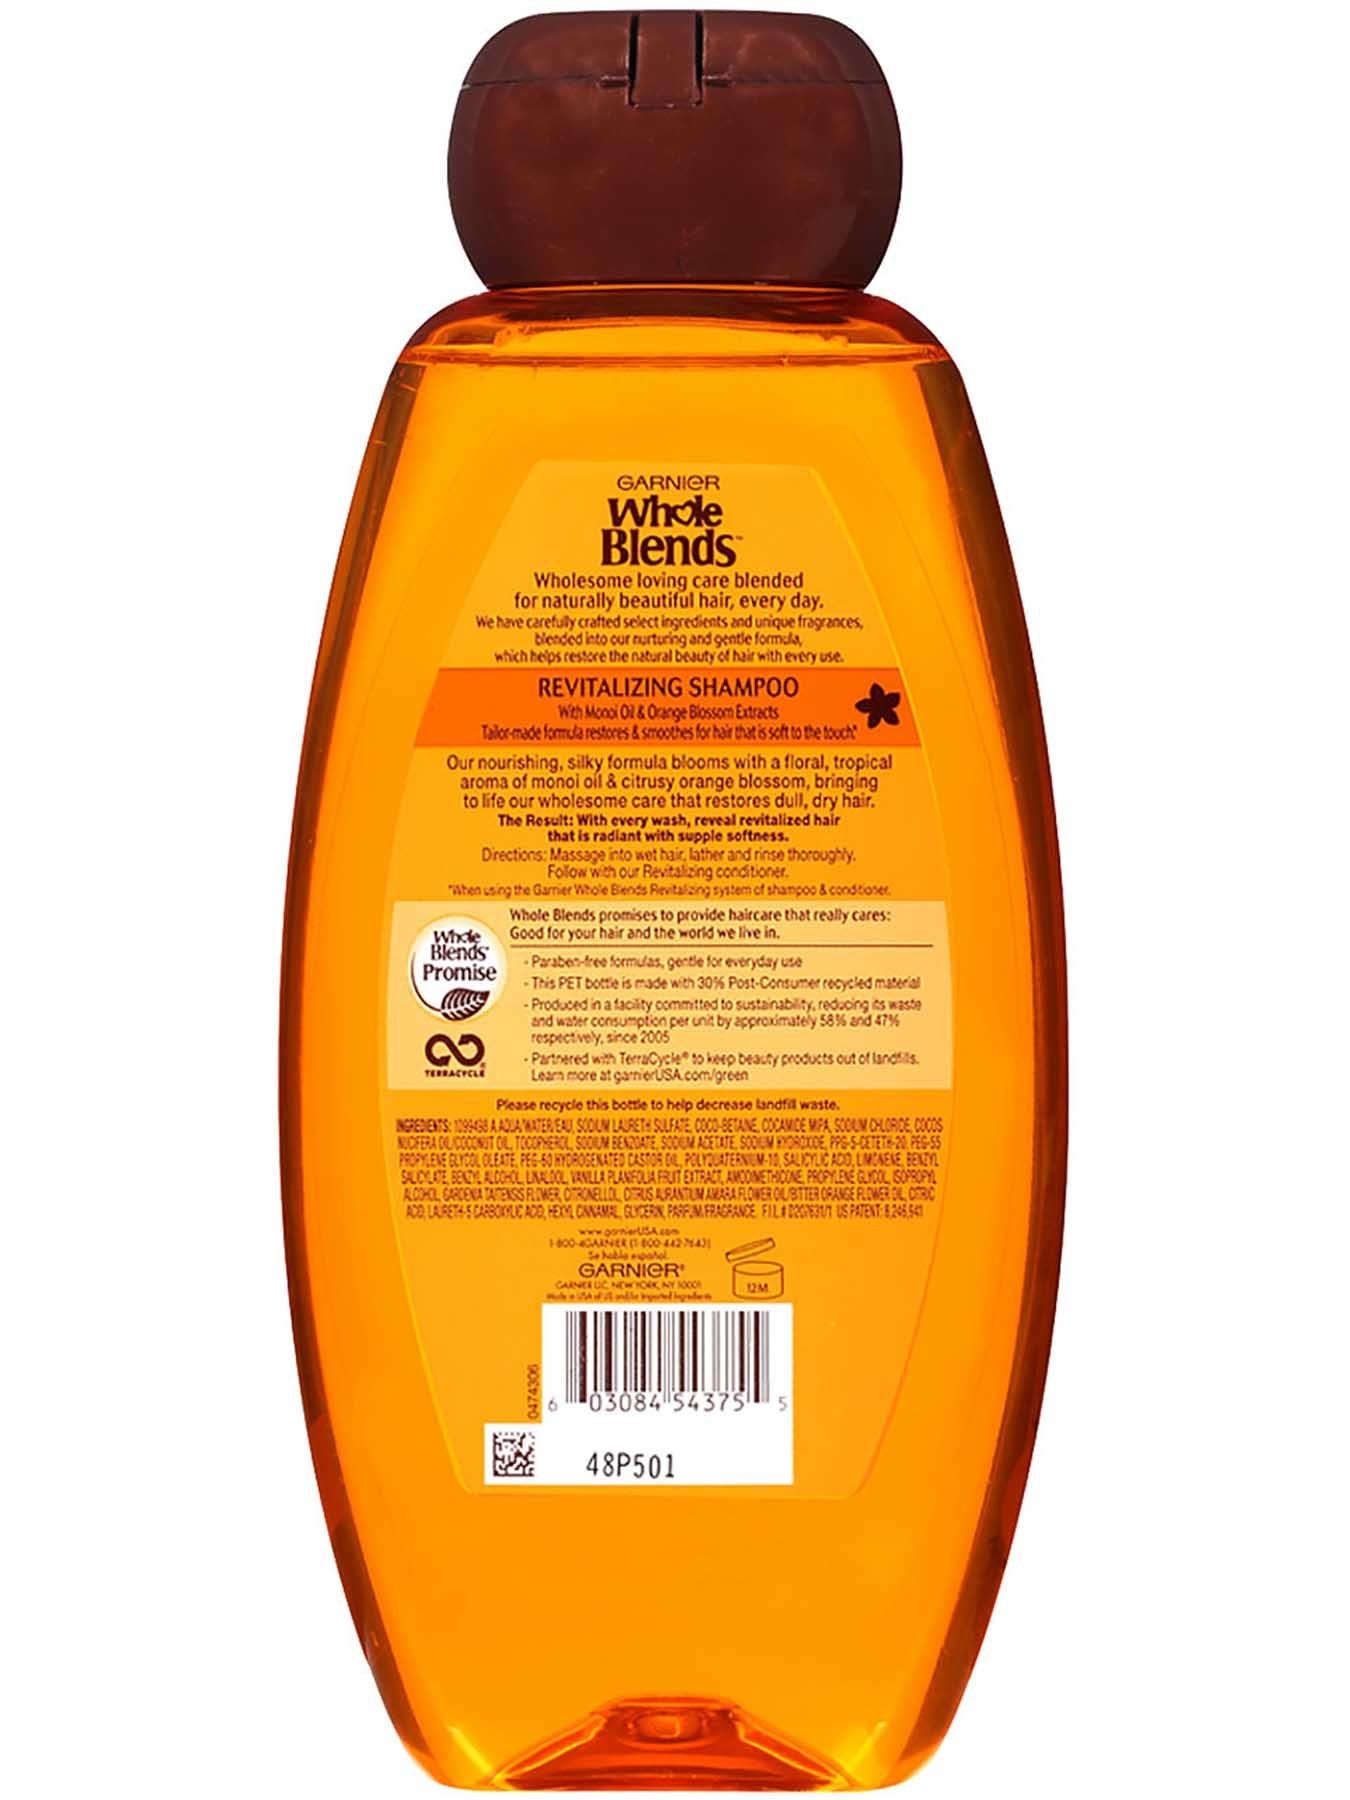 Back view of Revitalizing Shampoo with Monoi Oil and Orange Blossom Extracts.